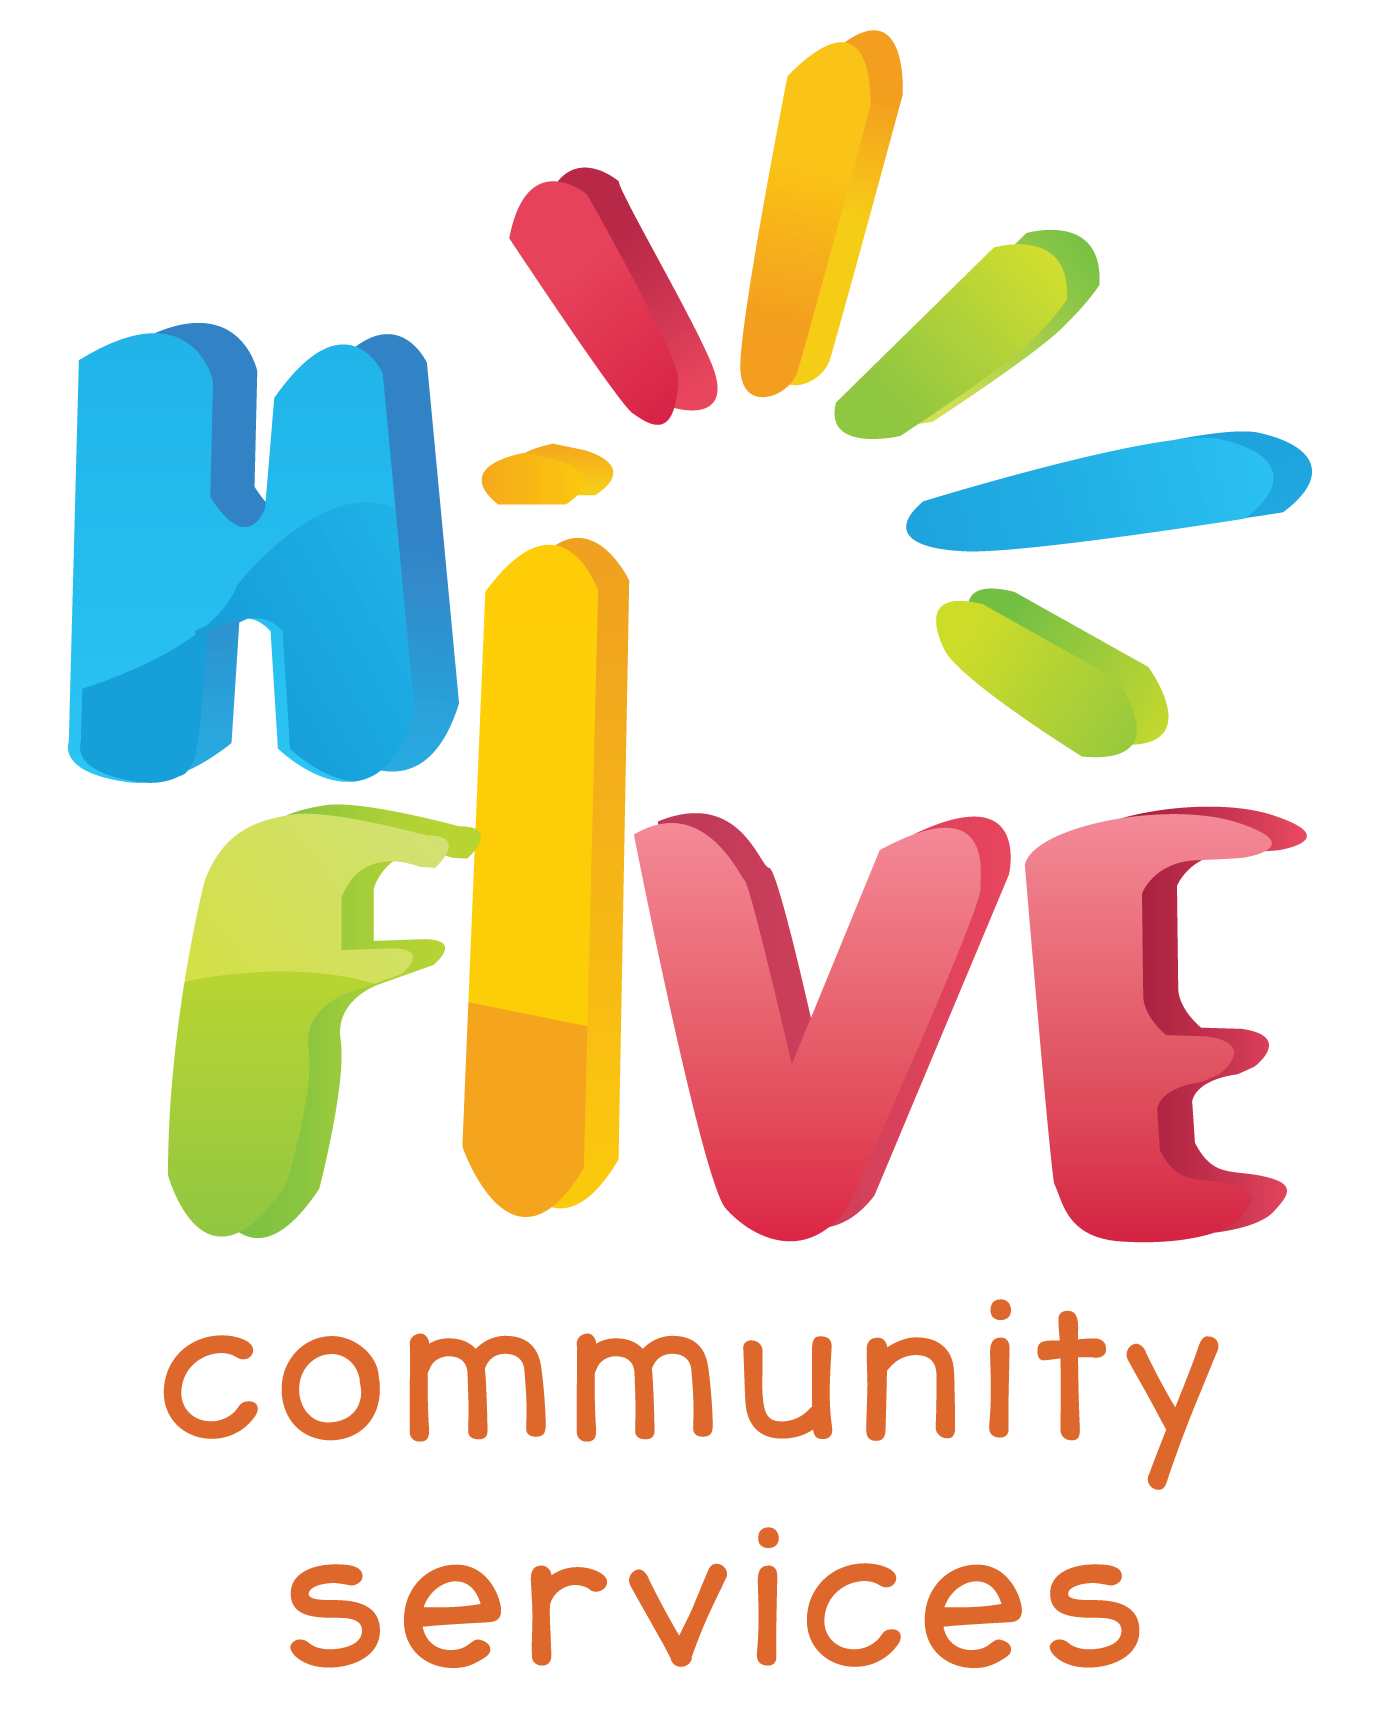 Hifive Community Services